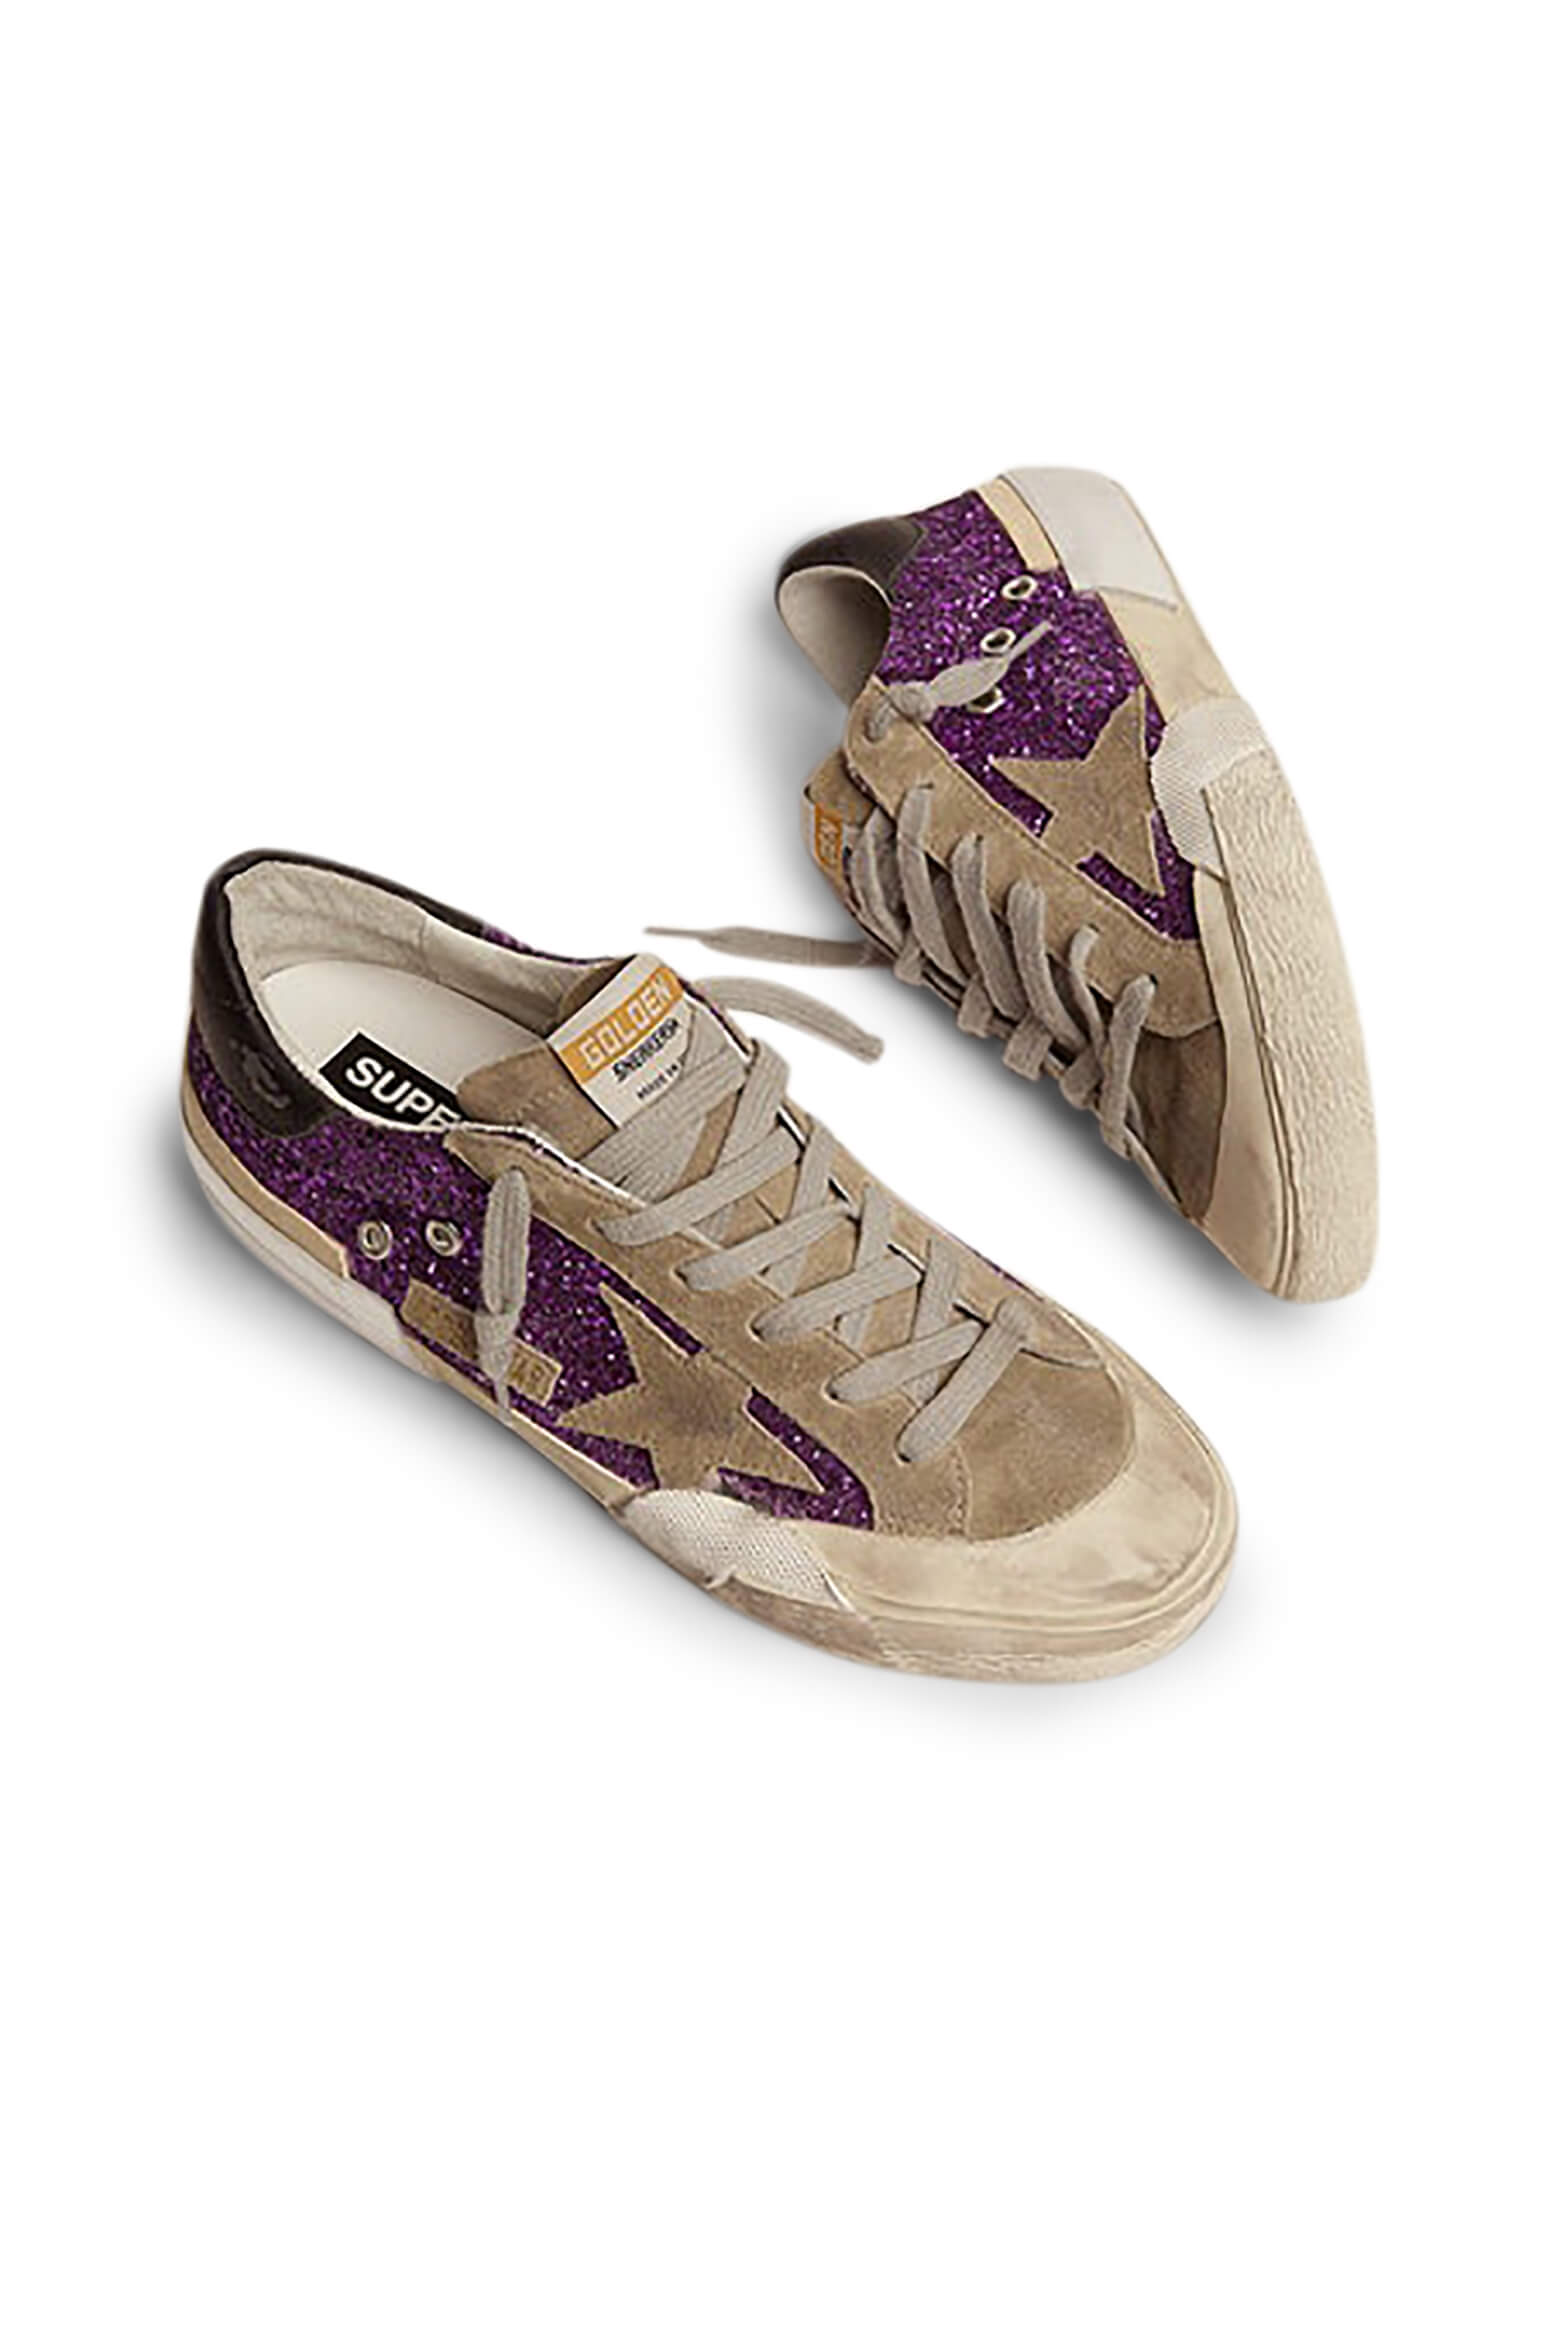 Golden Goose Superstar Sneakers in Purple Glitter, Taupe and Black from The New Trend